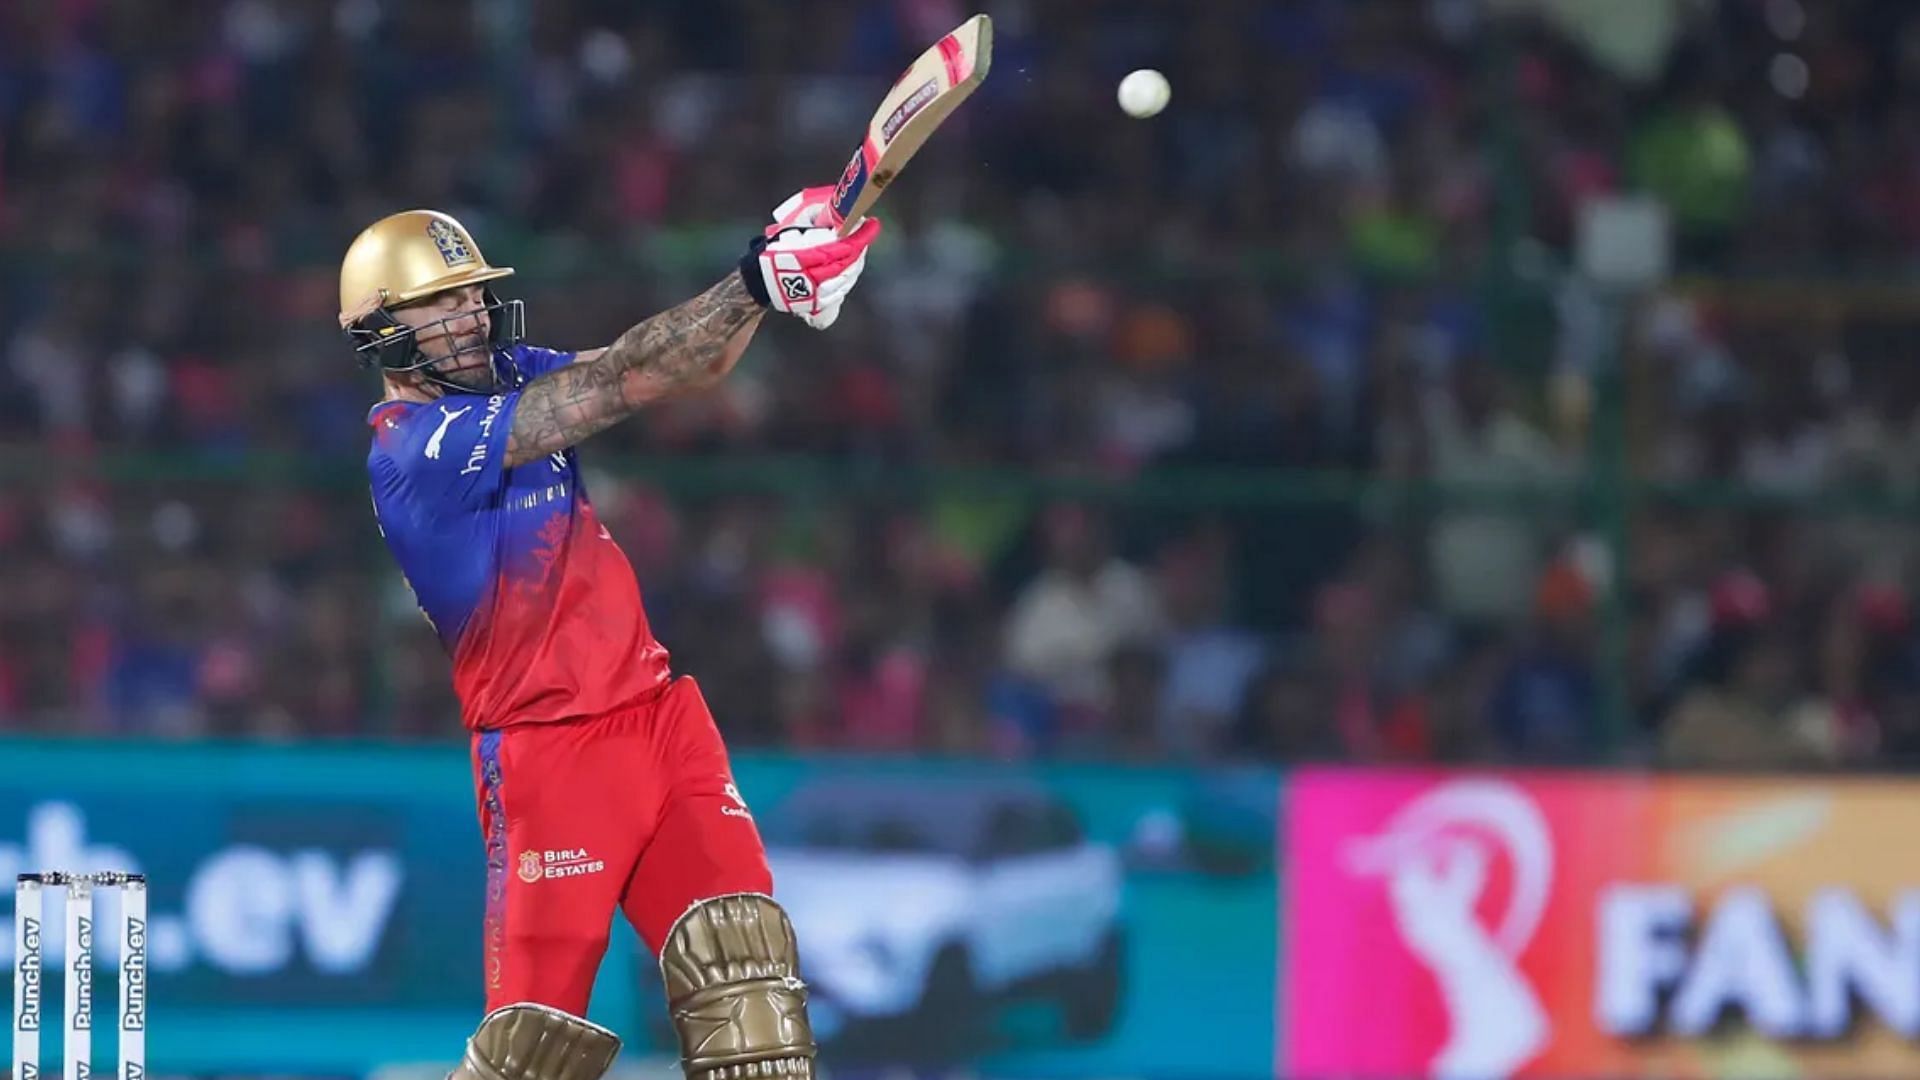 RCB need a big knock from Faf du Plessis at the Wankhede against MI